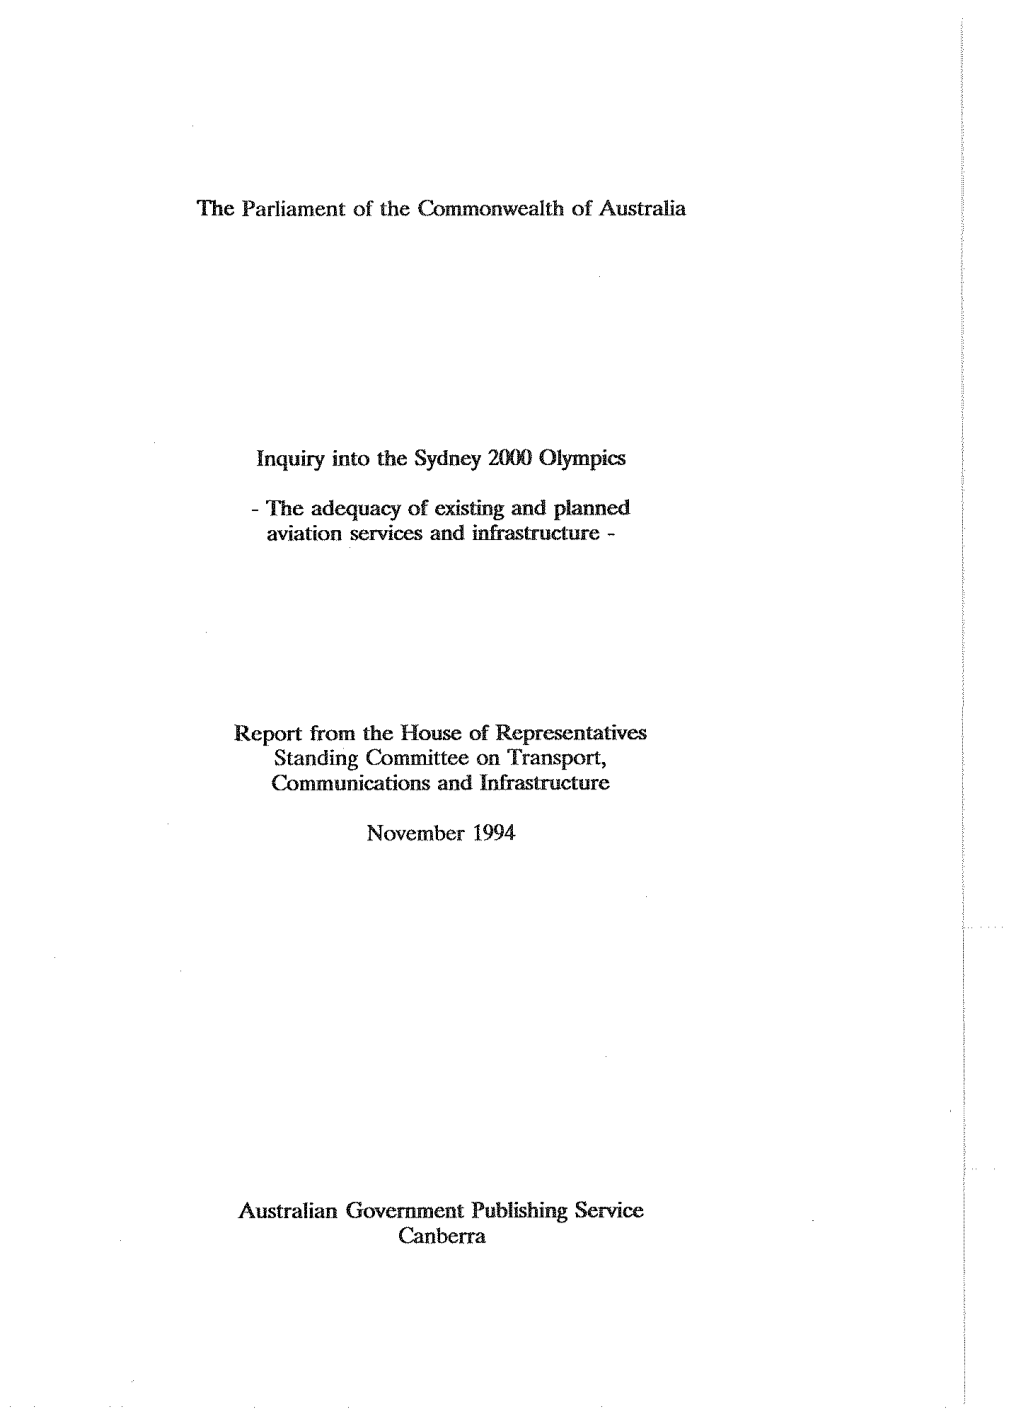 Aviation Services and Infrastructure - © Commonwealth of Australia 1994